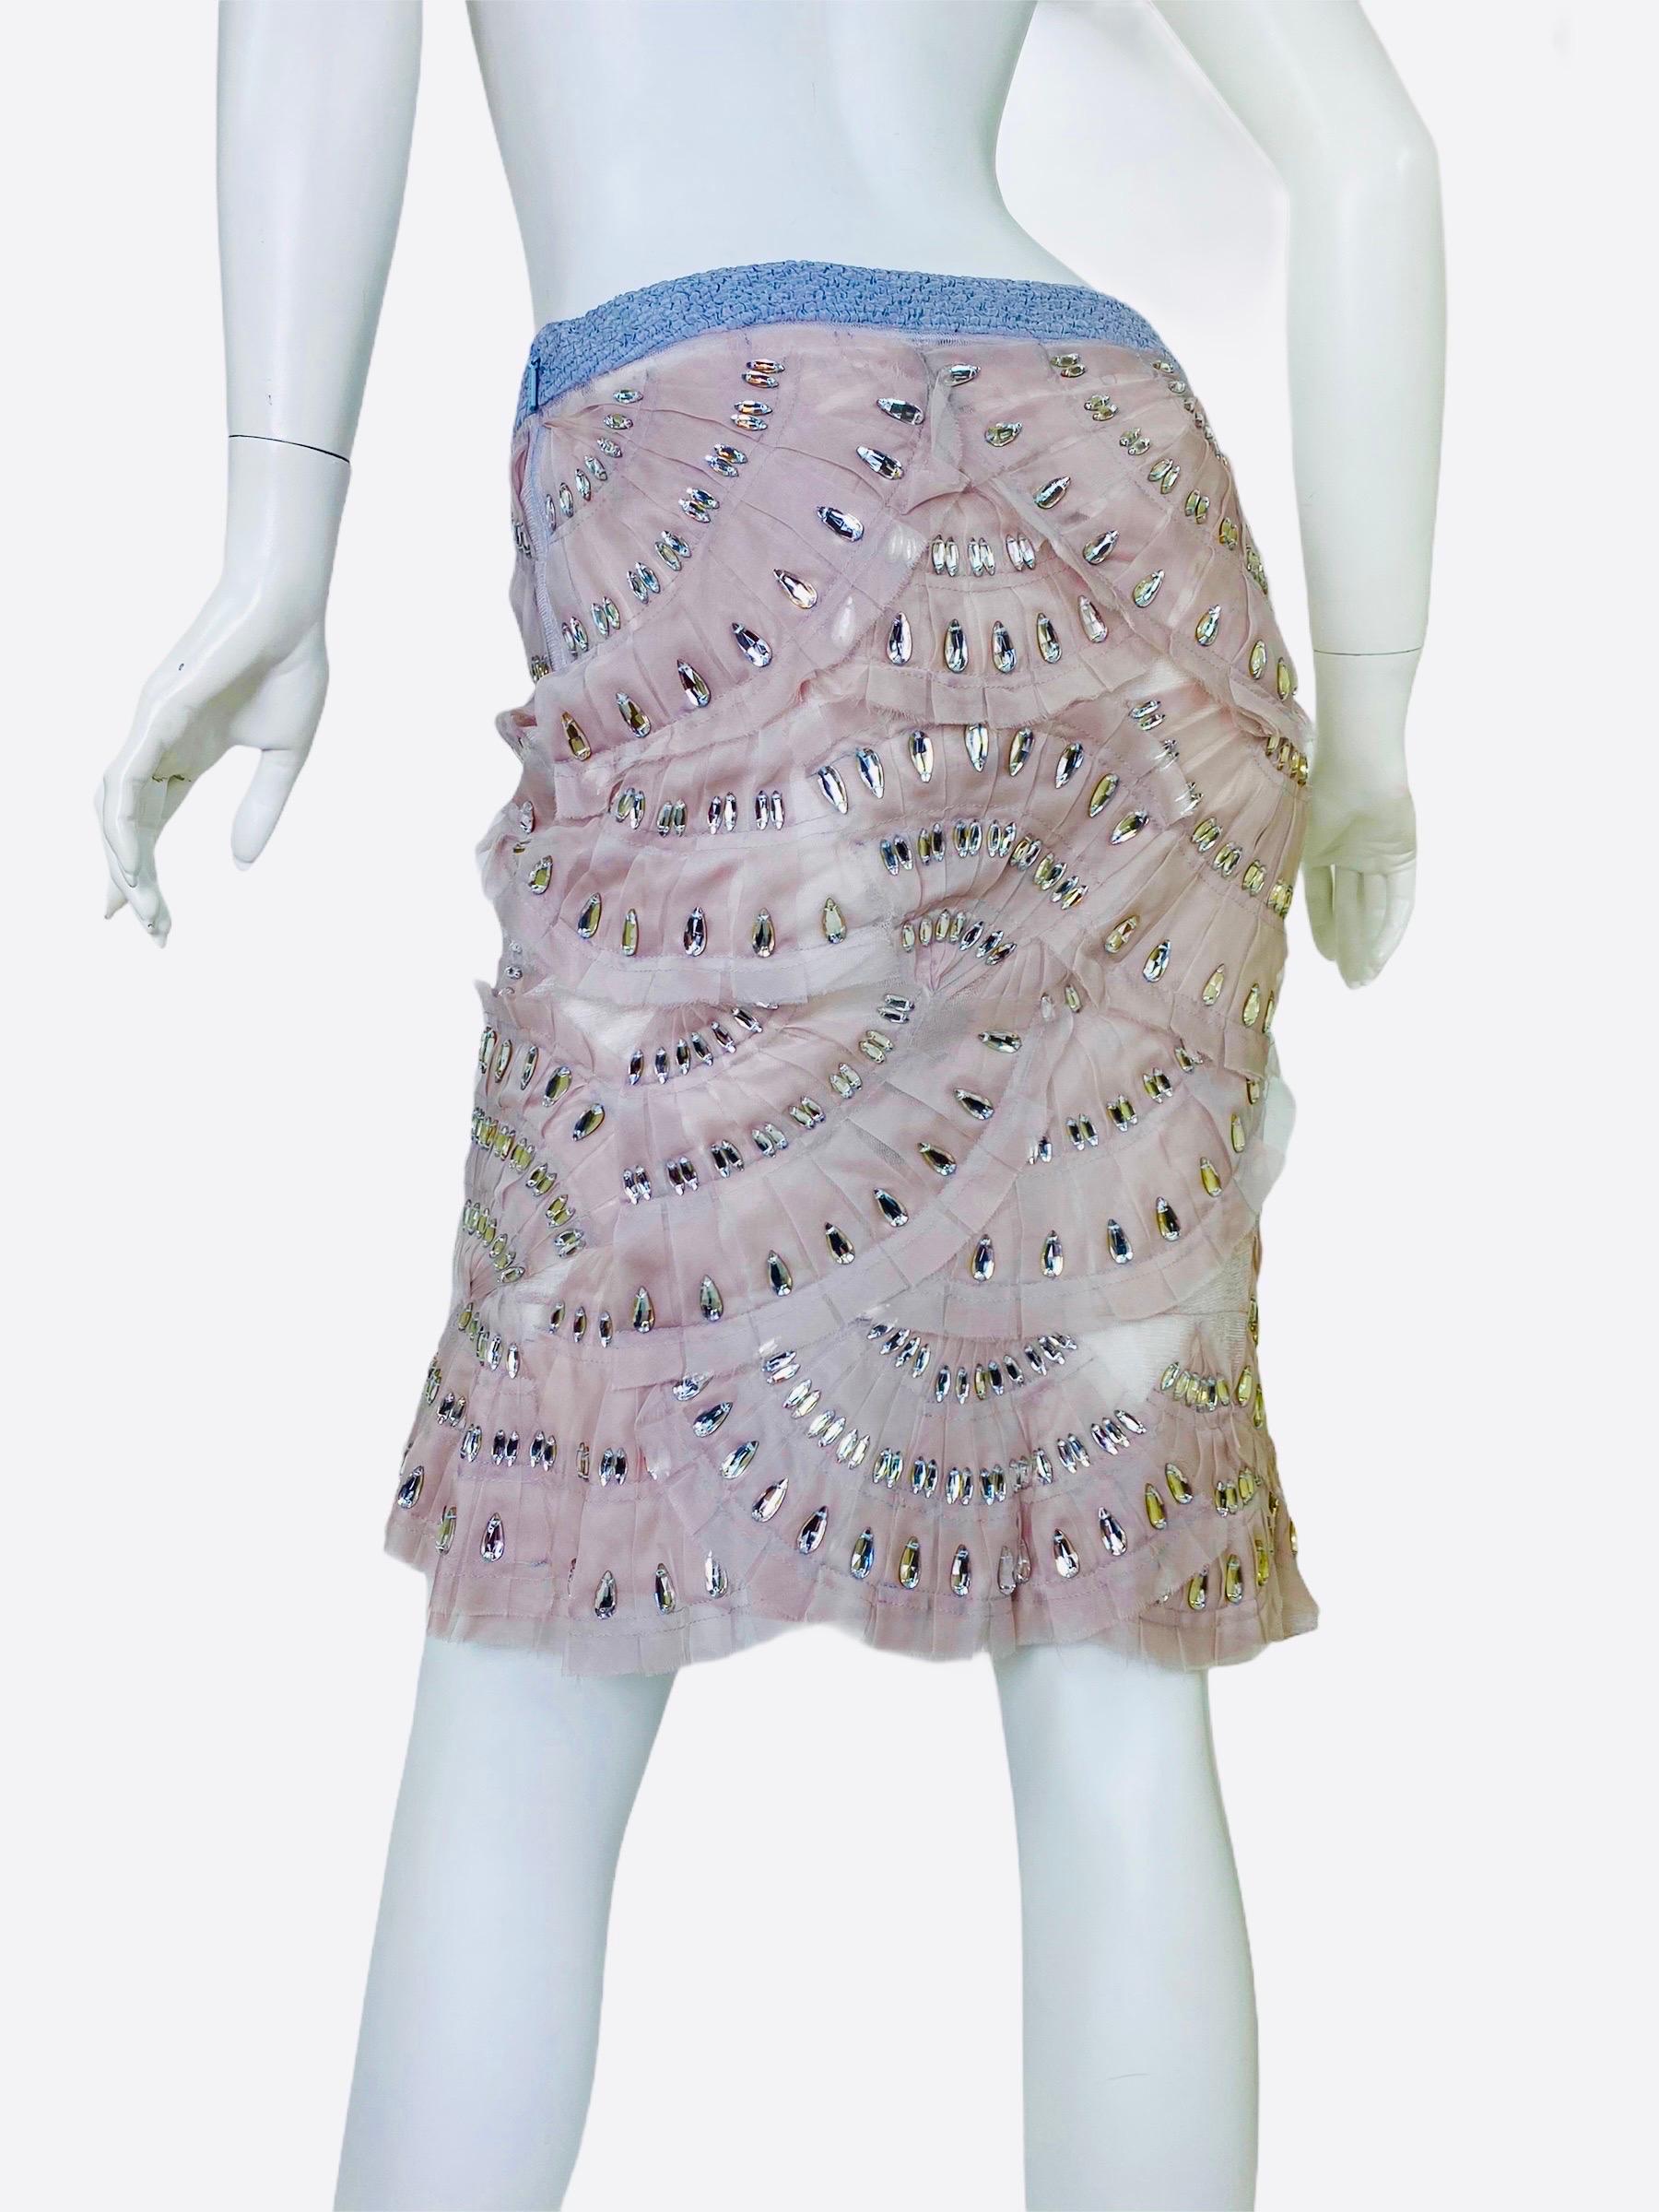 S/S 2004 Vintage Tom Ford for Gucci Runway Crystal Embellished Skirt Size 40 NWT For Sale 1